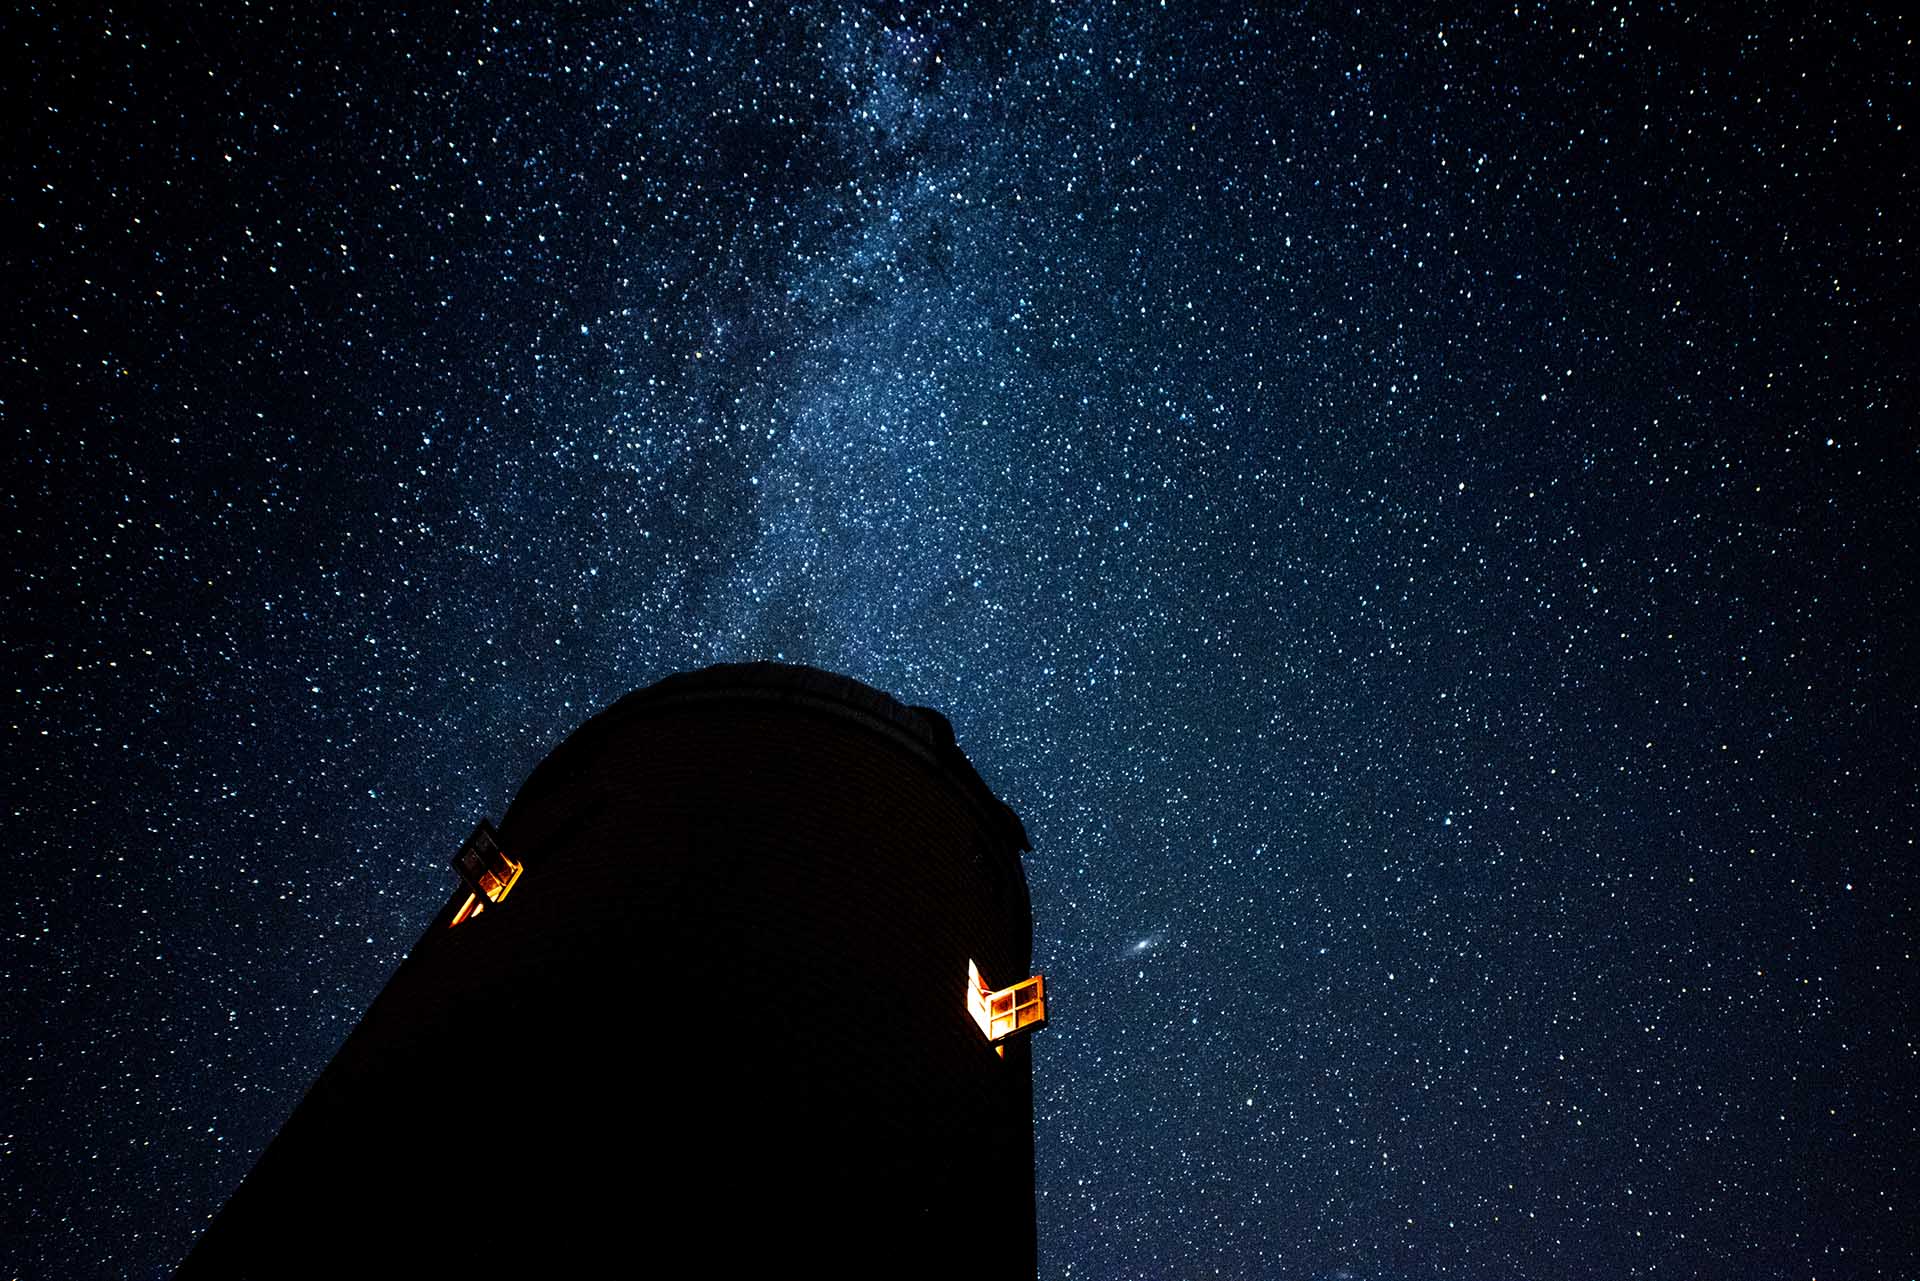 The observatory at the Roger Williams Estate at night with the Milky Way.